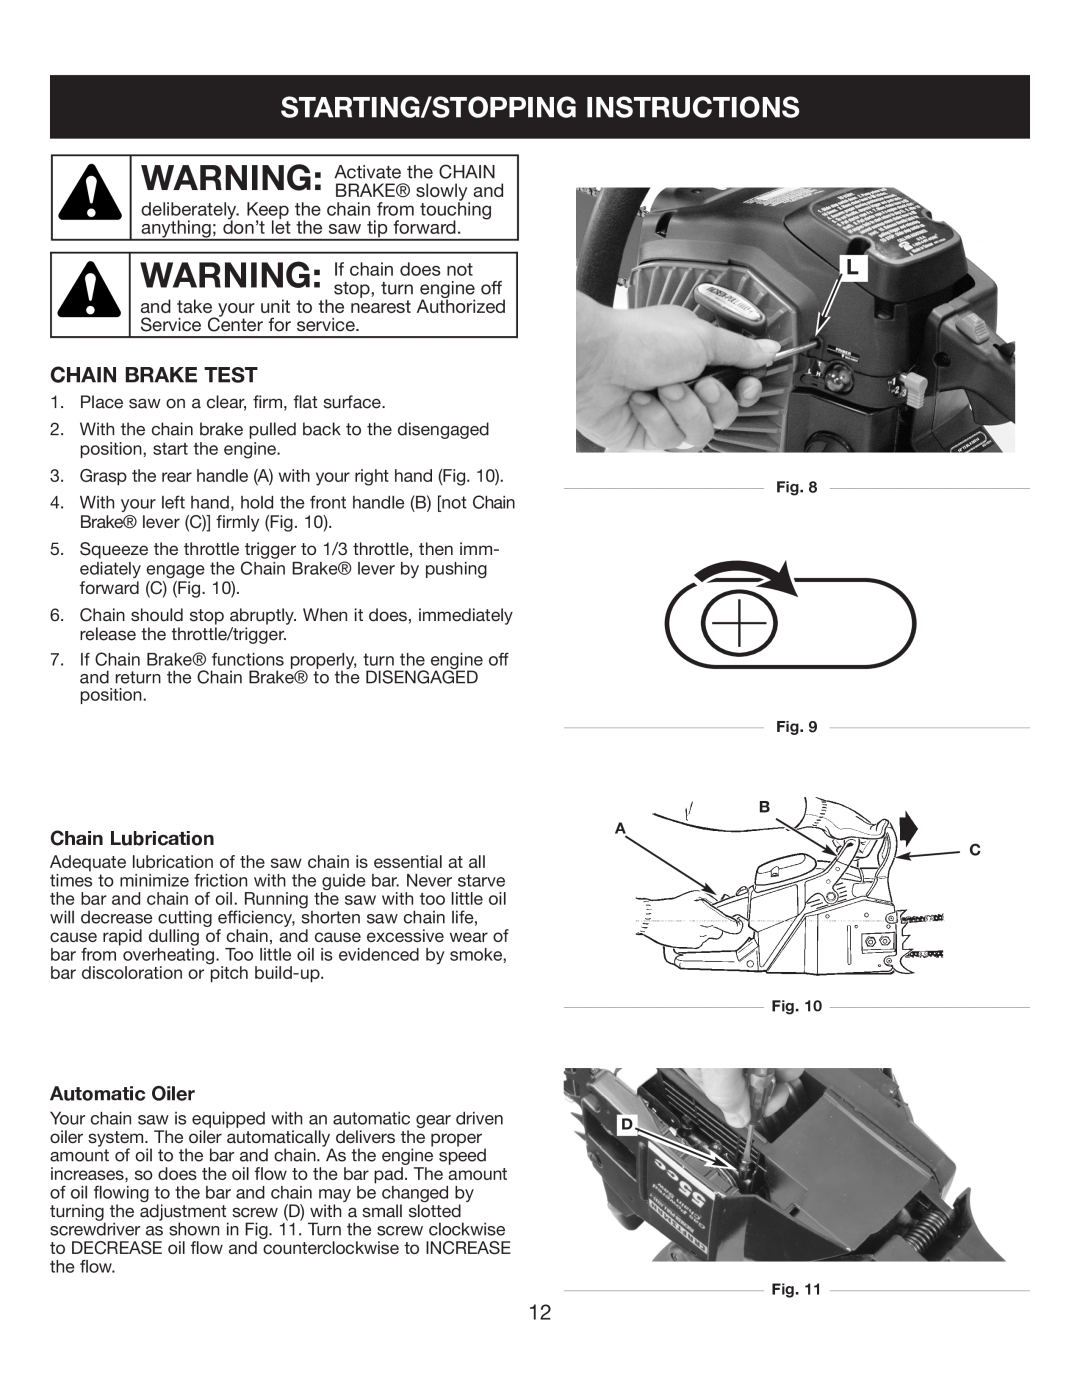 Sears 316.35084 manual Starting/Stopping Instructions, Chain Brake Test, Chain Lubrication, Automatic Oiler 